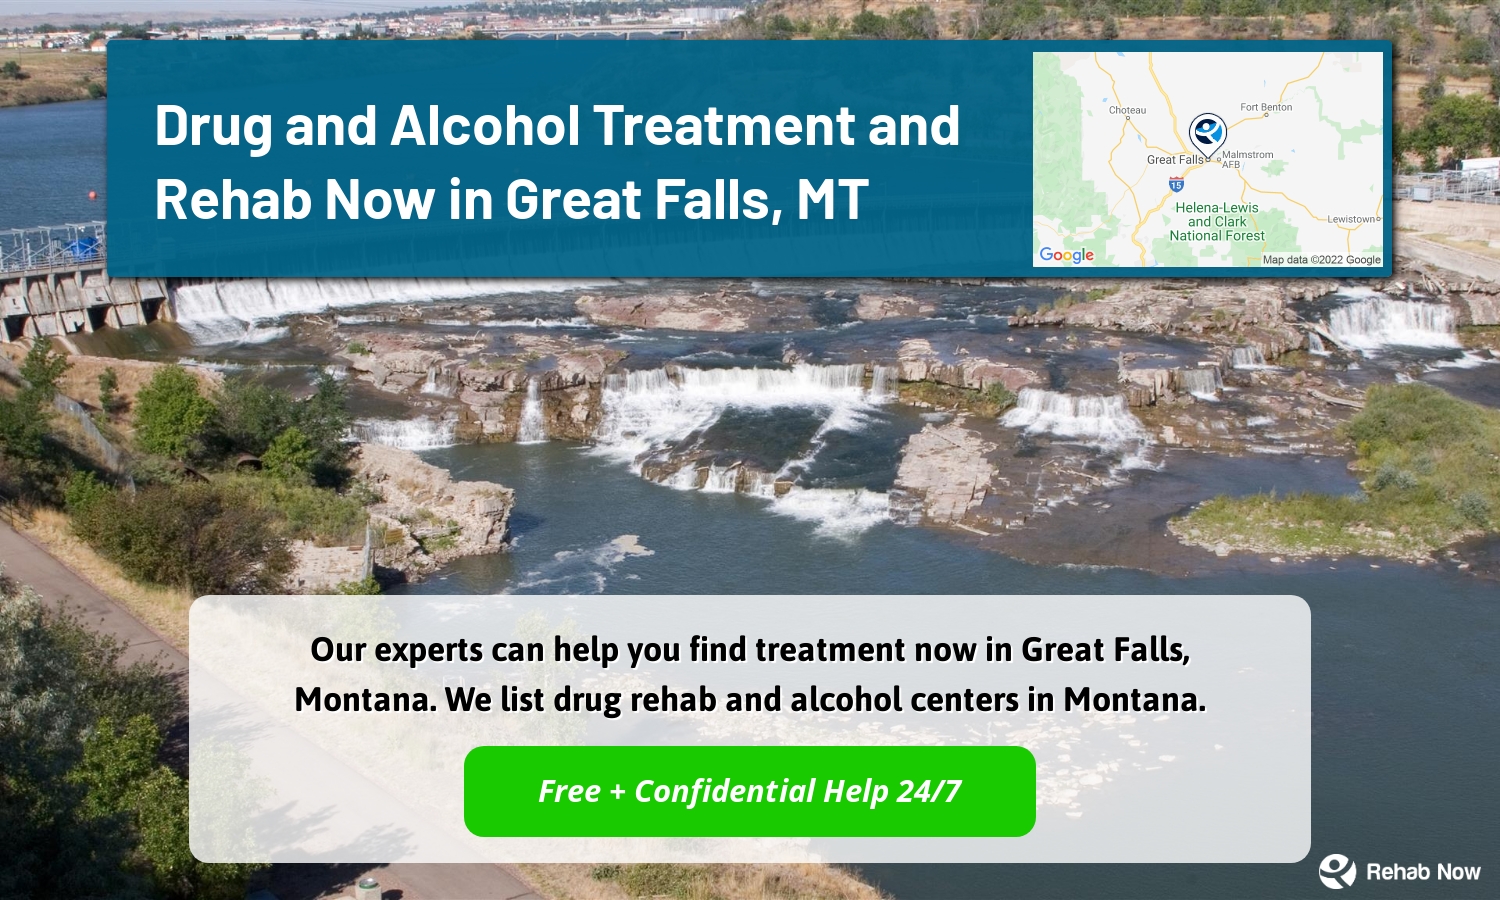 Our experts can help you find treatment now in Great Falls, Montana. We list drug rehab and alcohol centers in Montana.